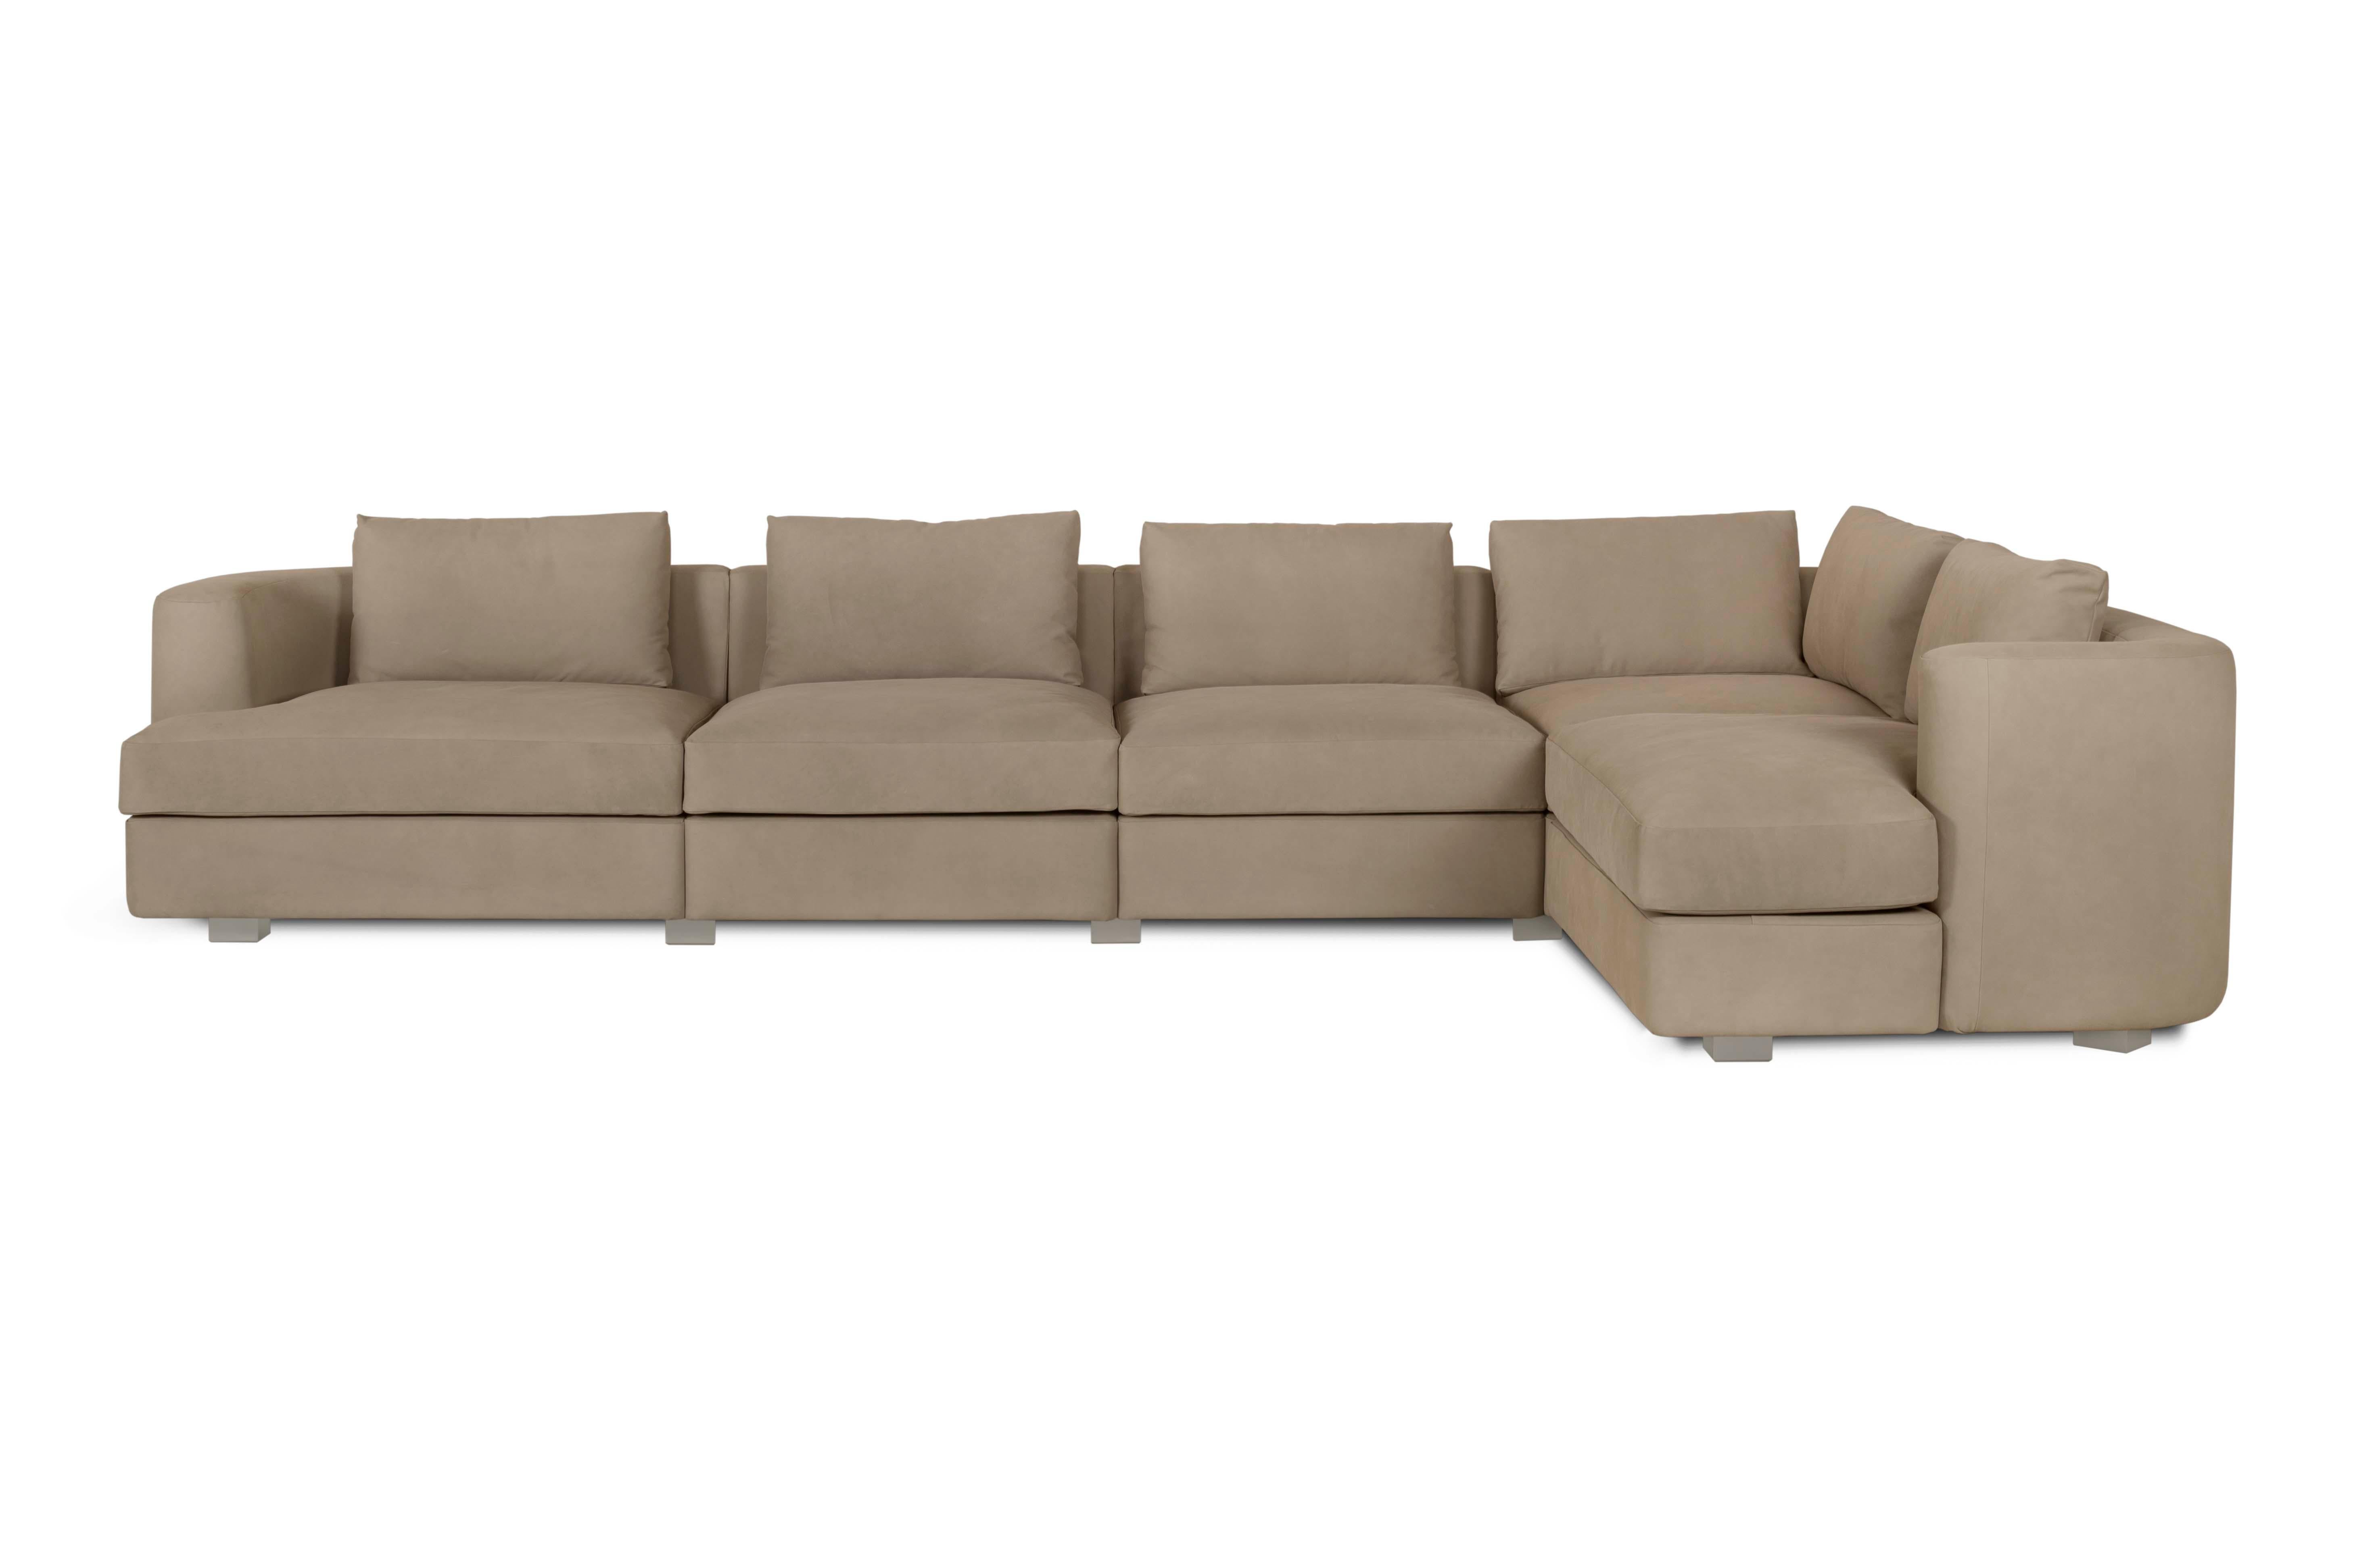 Sand Wave Sofa w/ Chaise, Contemporary Collection, Handcrafted in Portugal - Europe by Greenapple.

Like the sand waves flowing in the desert, this sofa brings a sense of calm and peace to anyone who dares to dig deep into relaxation. Inspired by